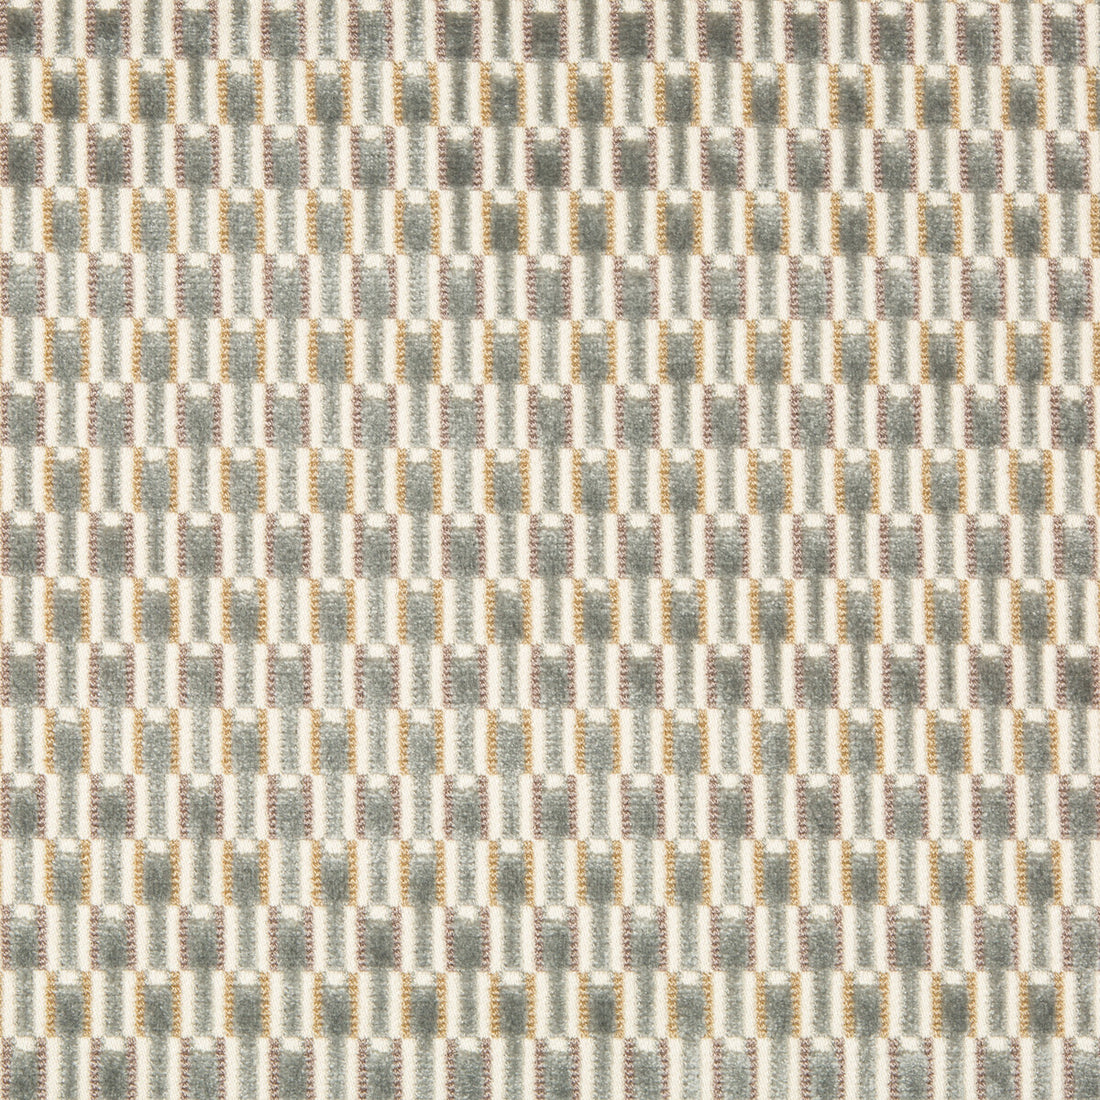 Finishing Touch fabric in platinum color - pattern 34791.11.0 - by Kravet Couture in the Artisan Velvets collection